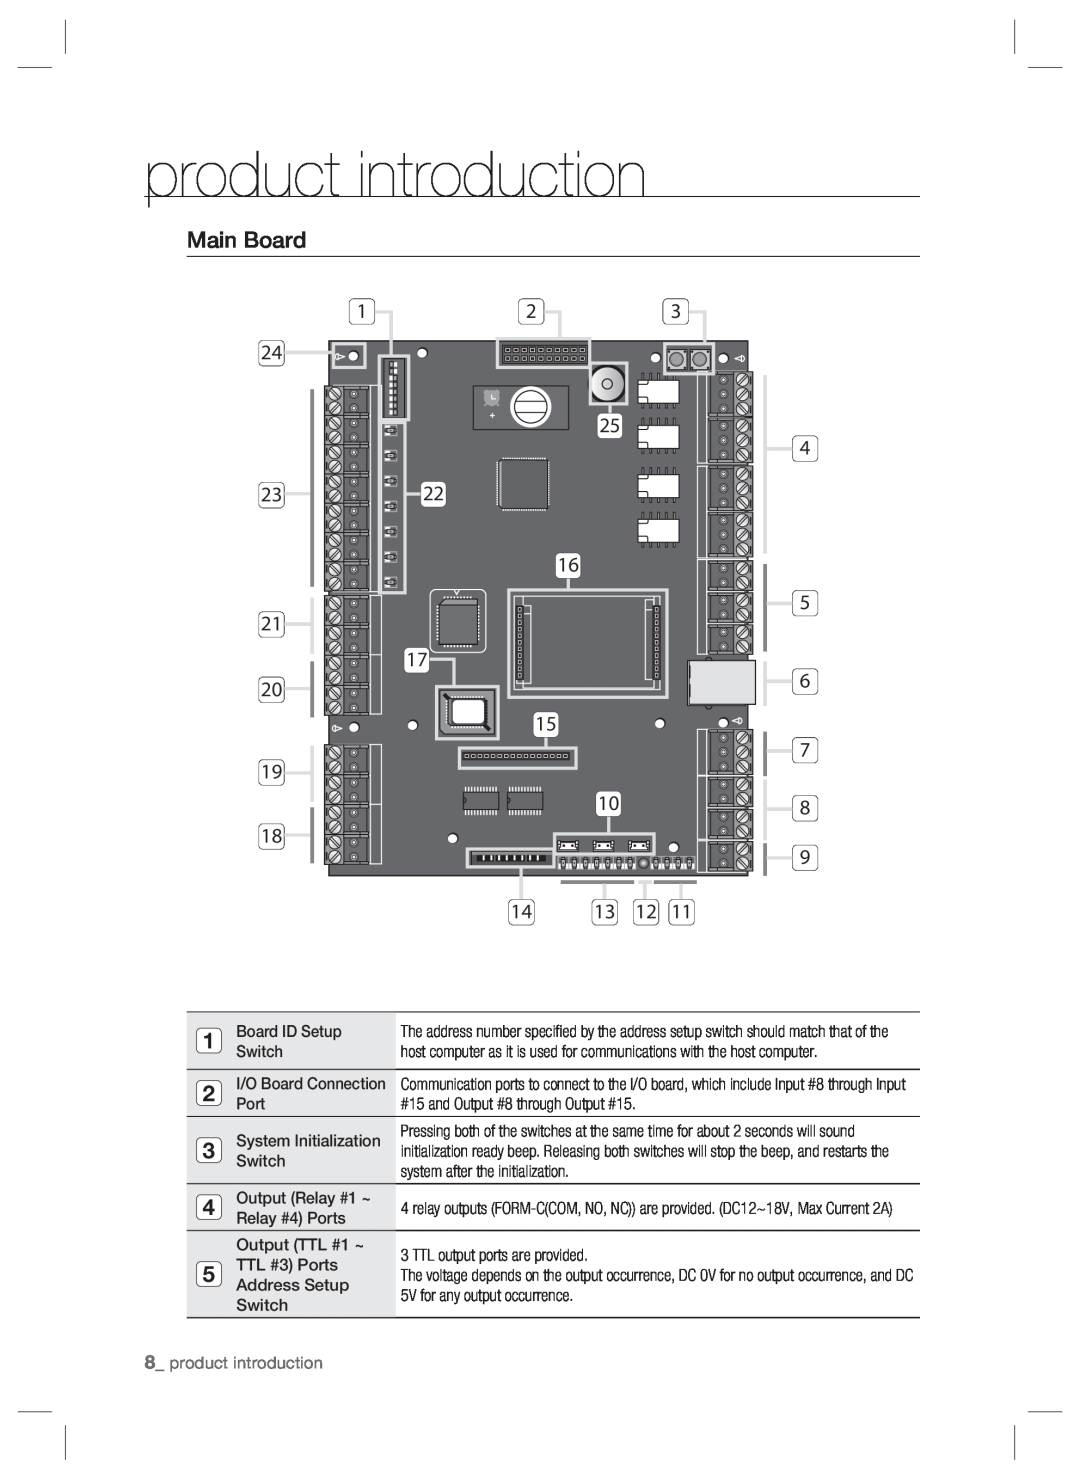 Samsung SSA-P400T, SSA-P401T user manual Main Board, 4 5 6 7, product introduction 